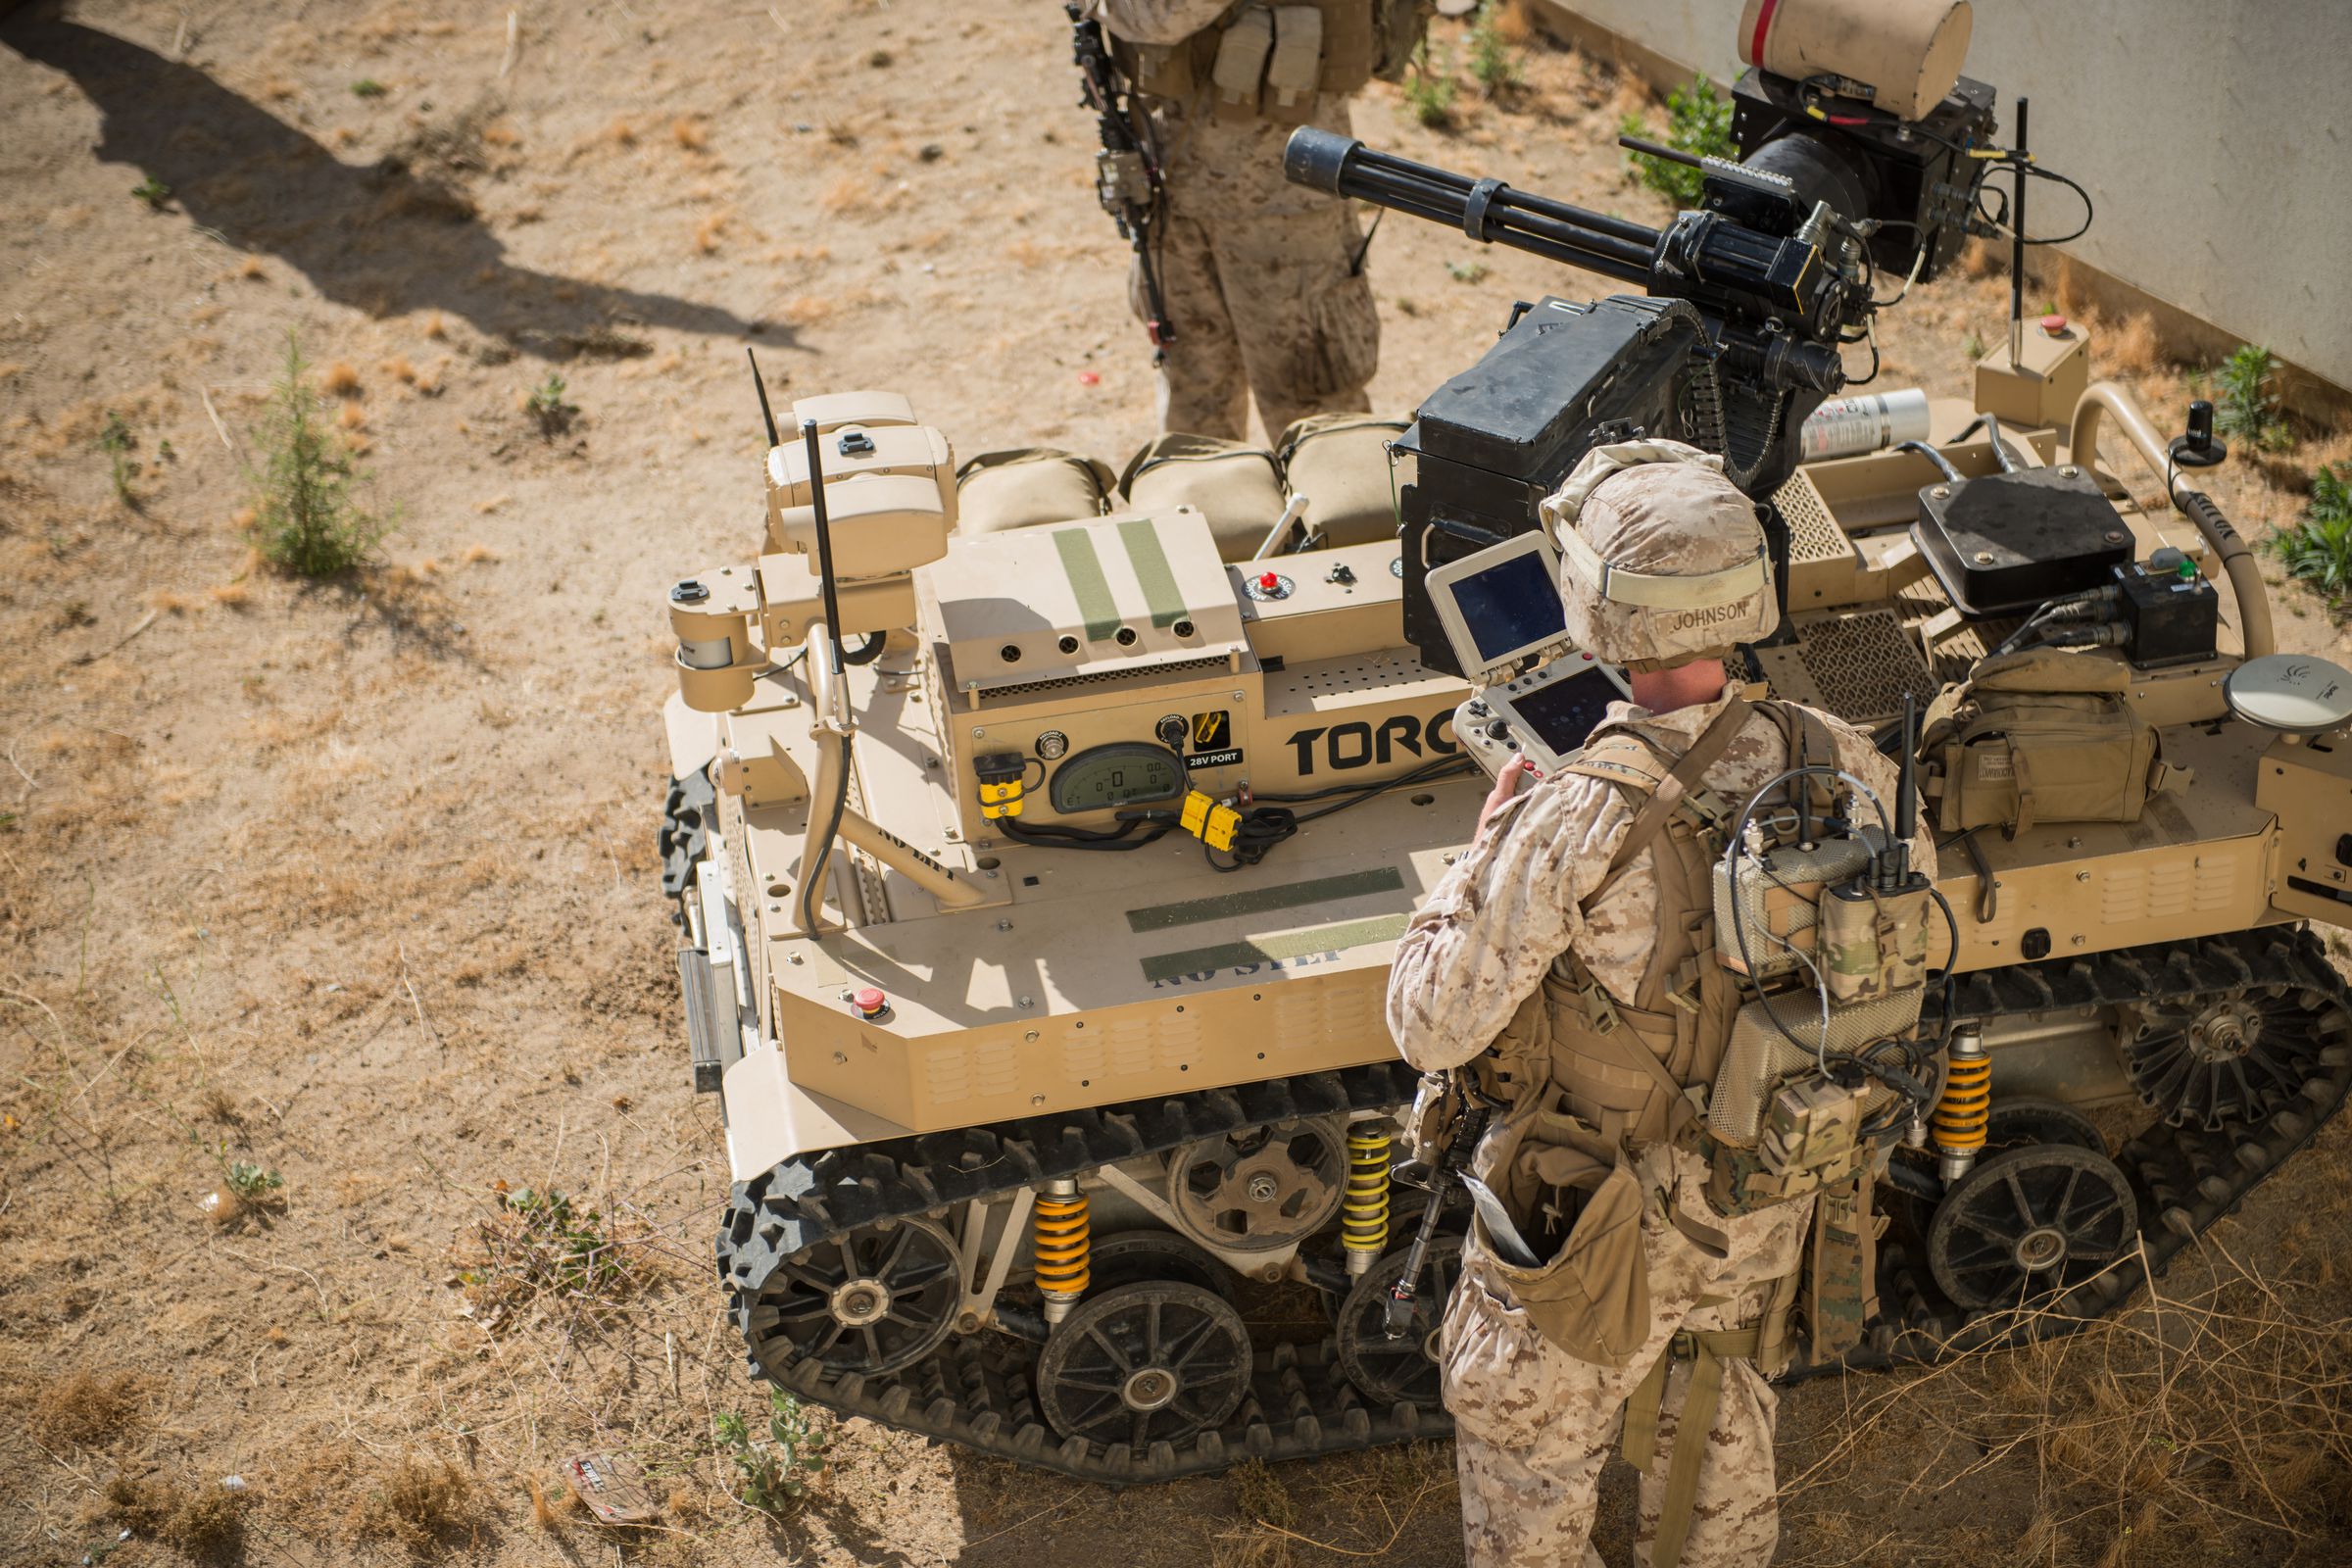 A remote control robot equipped with a machine gun under develpment by the US marines.